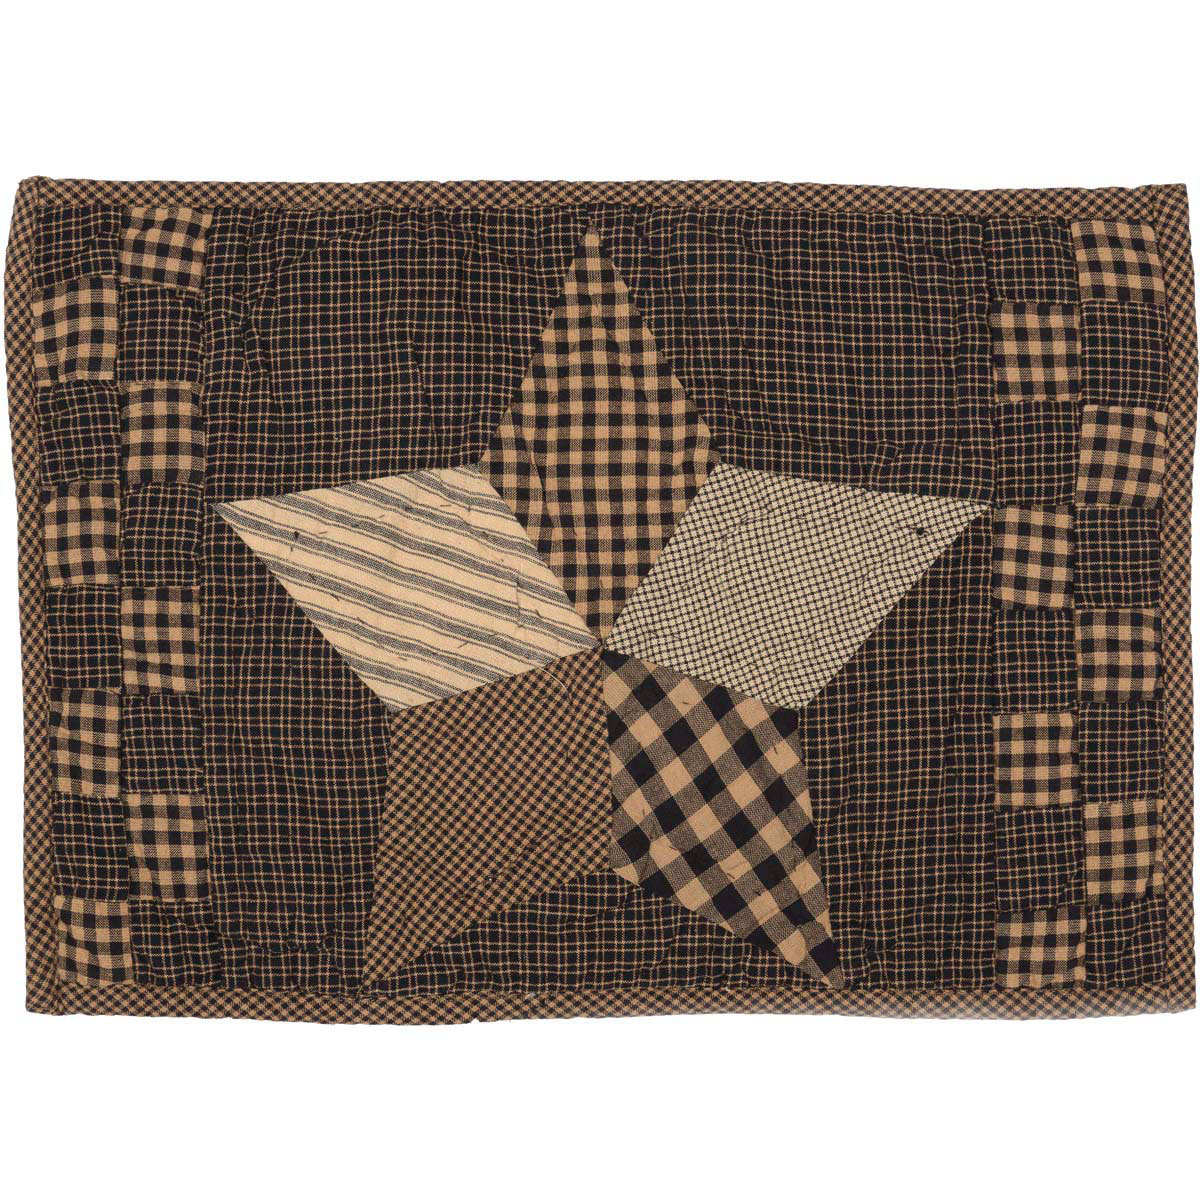 Star Quilted Placemat Set/6